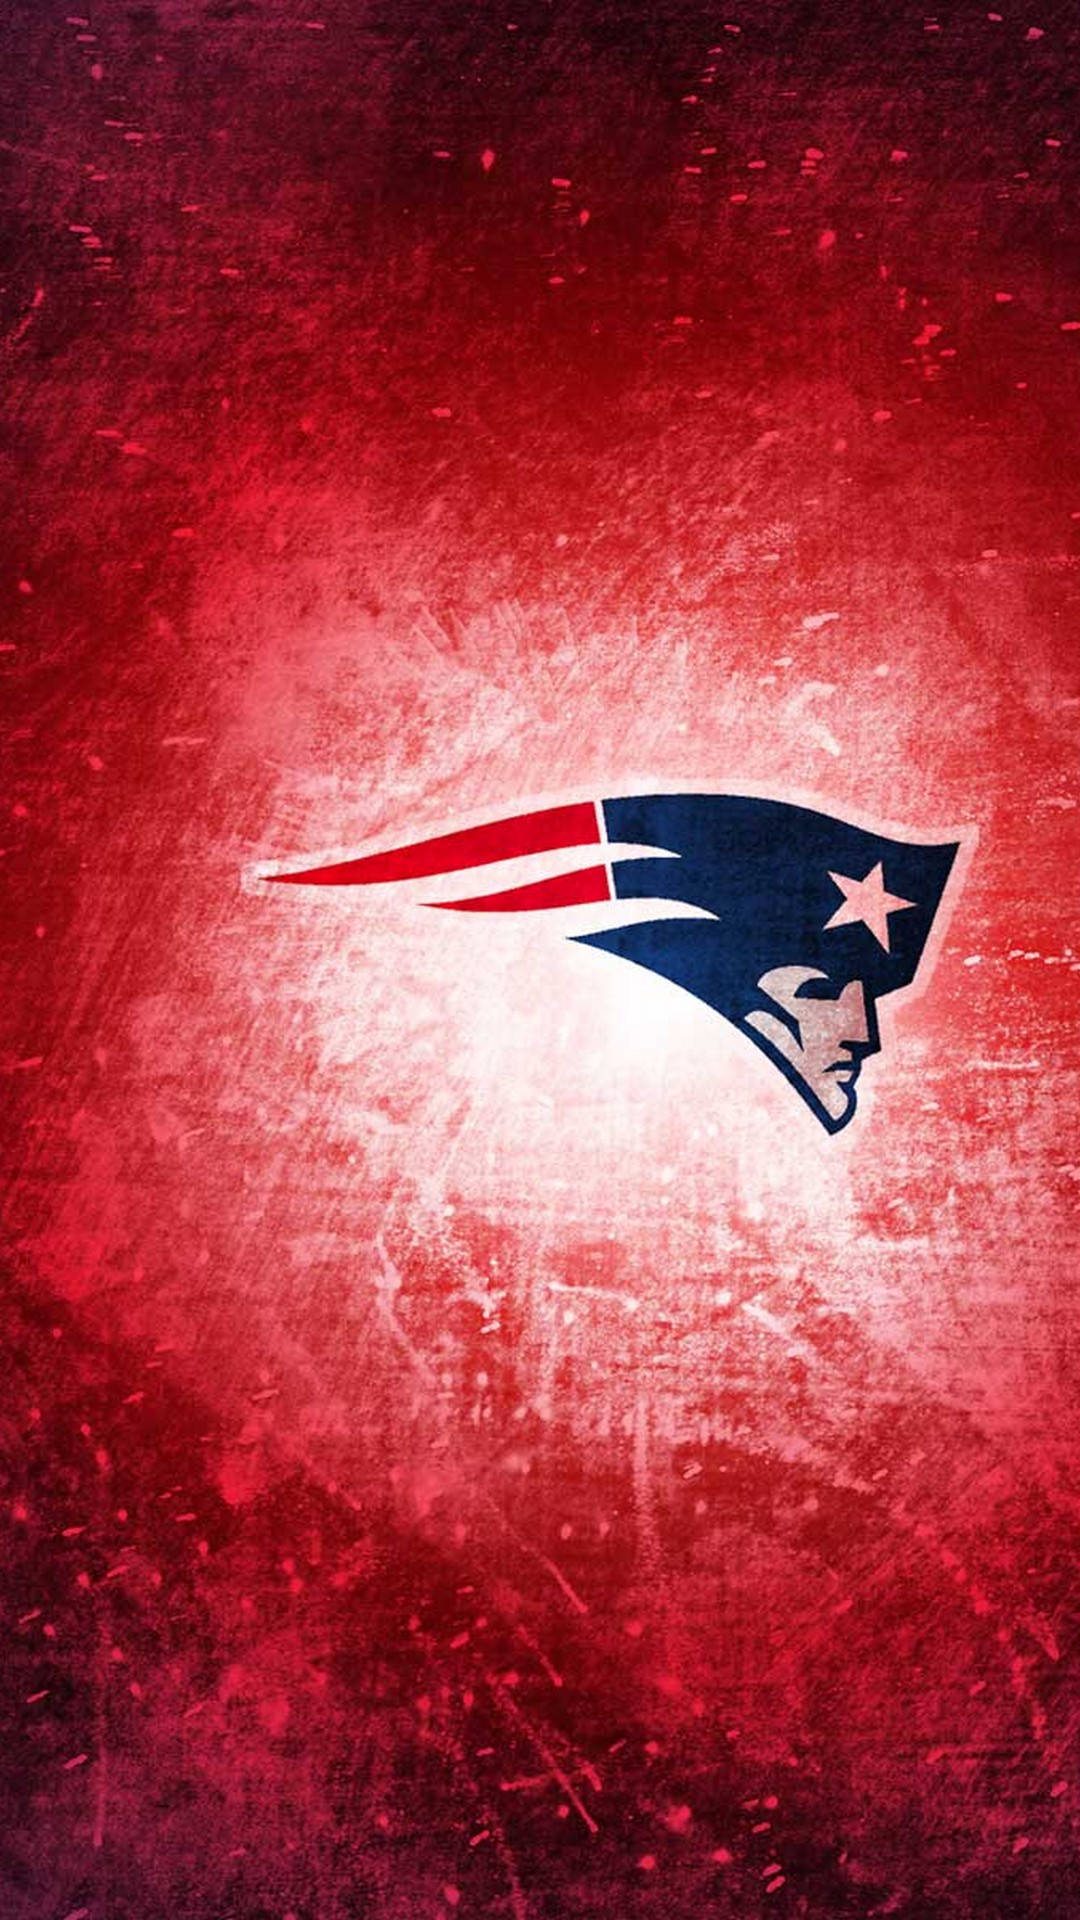 Show Your American Pride with Awesome Patriots Wallpaper